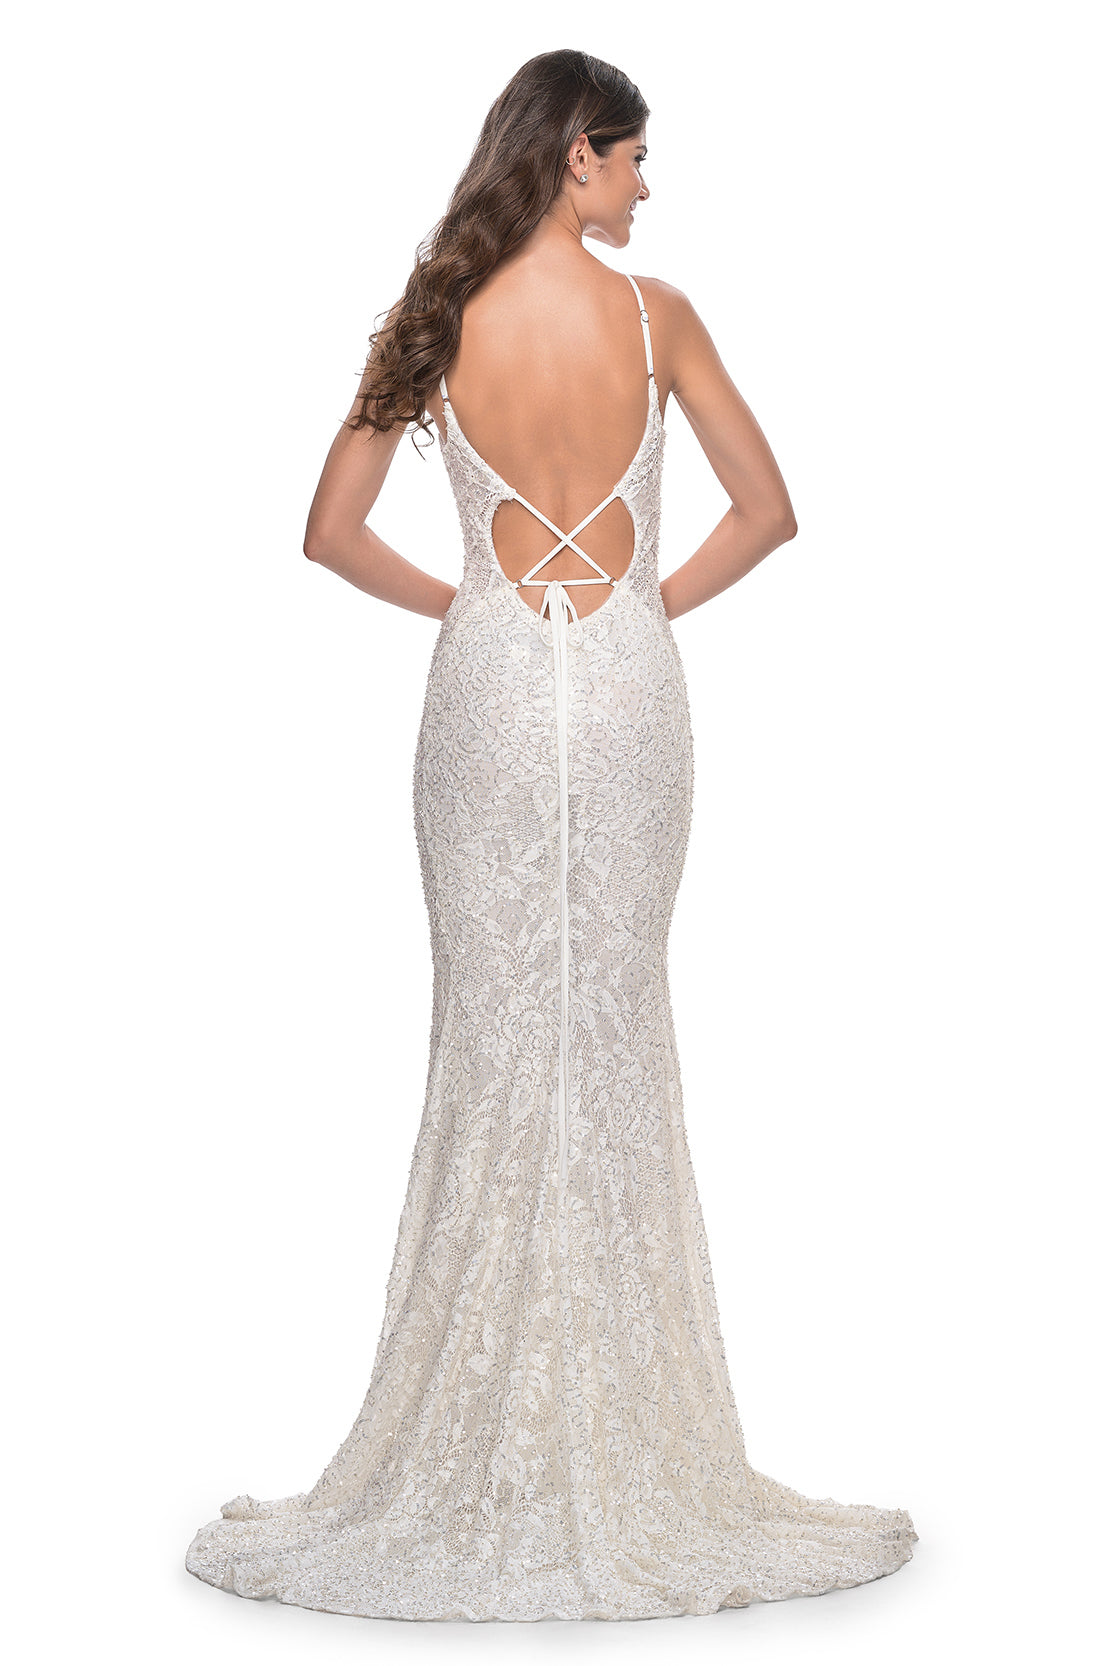 La Femme 32309 Beaded Lace Mermaid Prom Gown - An enchanting prom gown with a beaded lace mermaid silhouette, open lace-up back, and sheer lace panels on both sides. The model is wearing the dress in the color white.